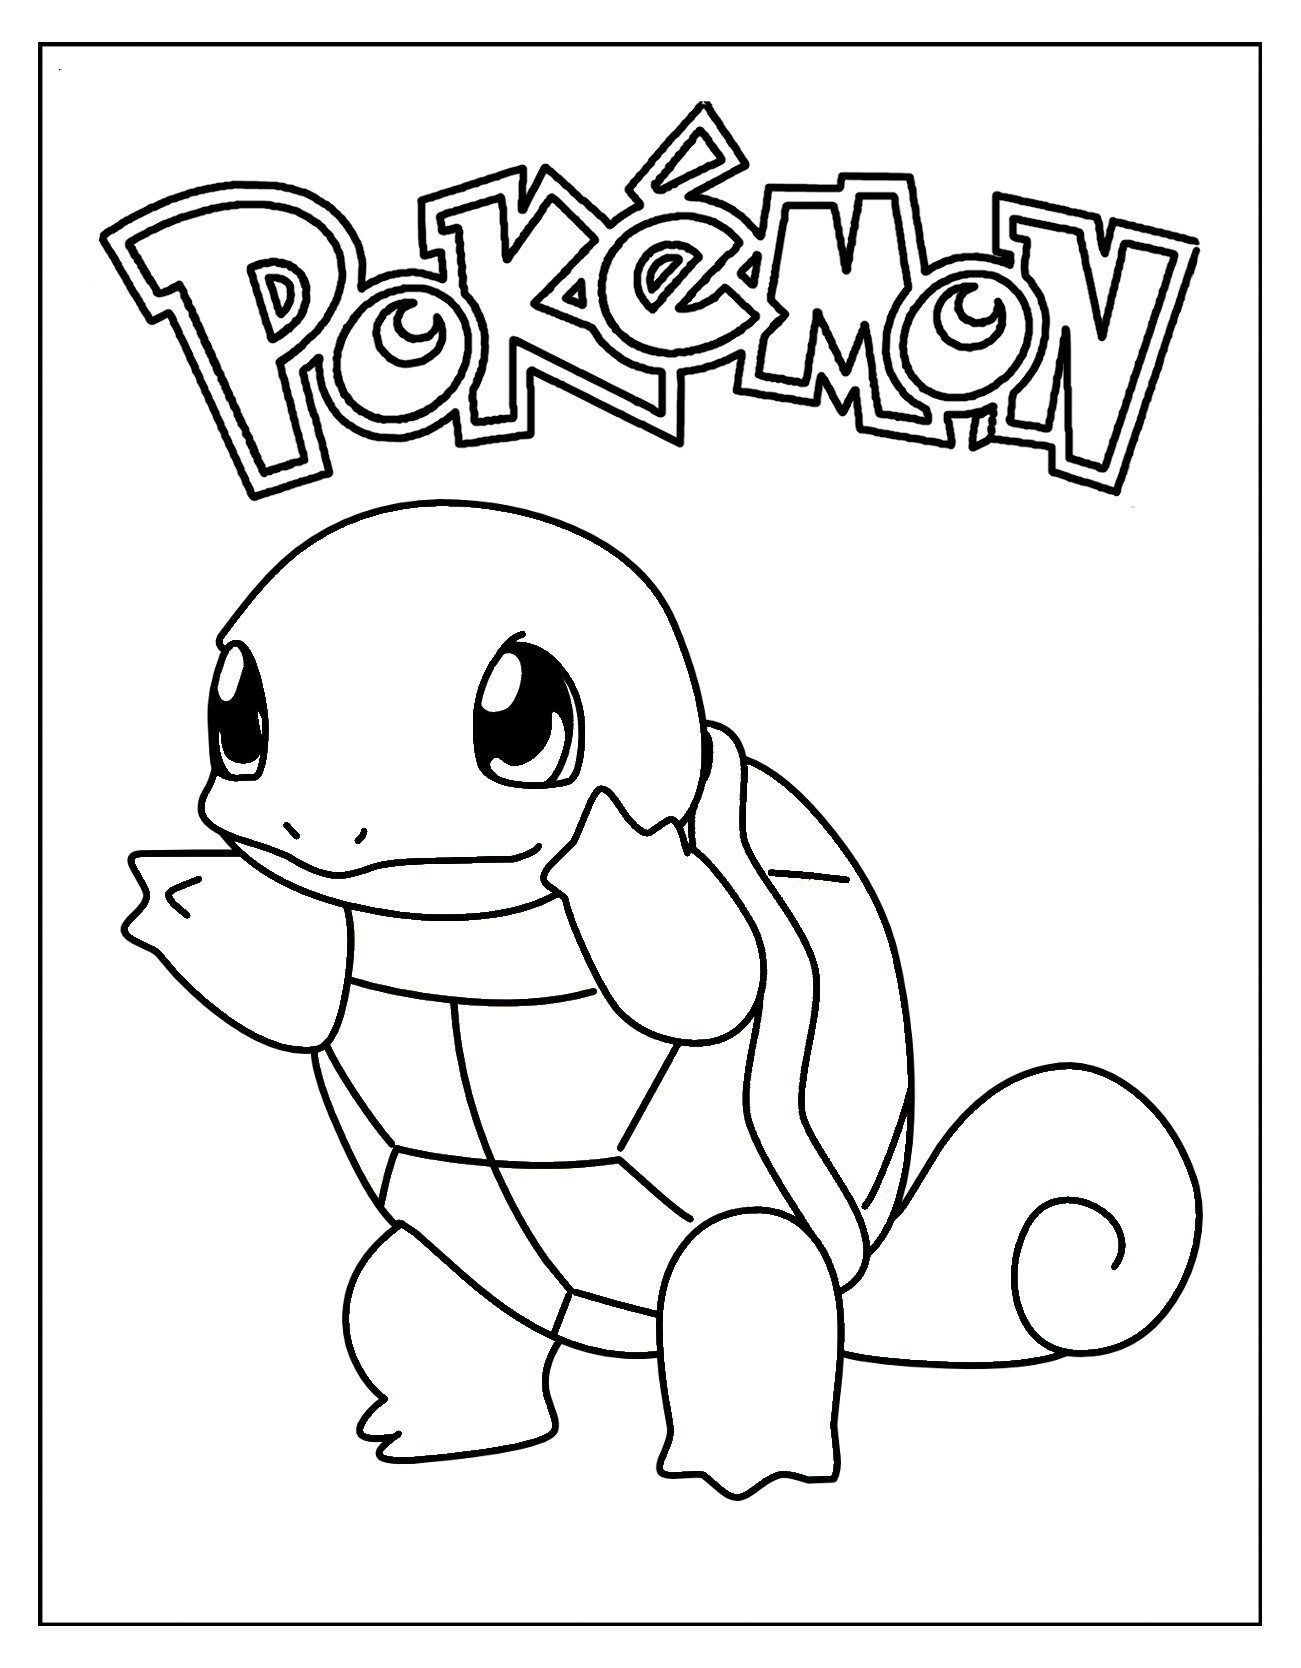 Pokemon Squirtle Coloring Pages